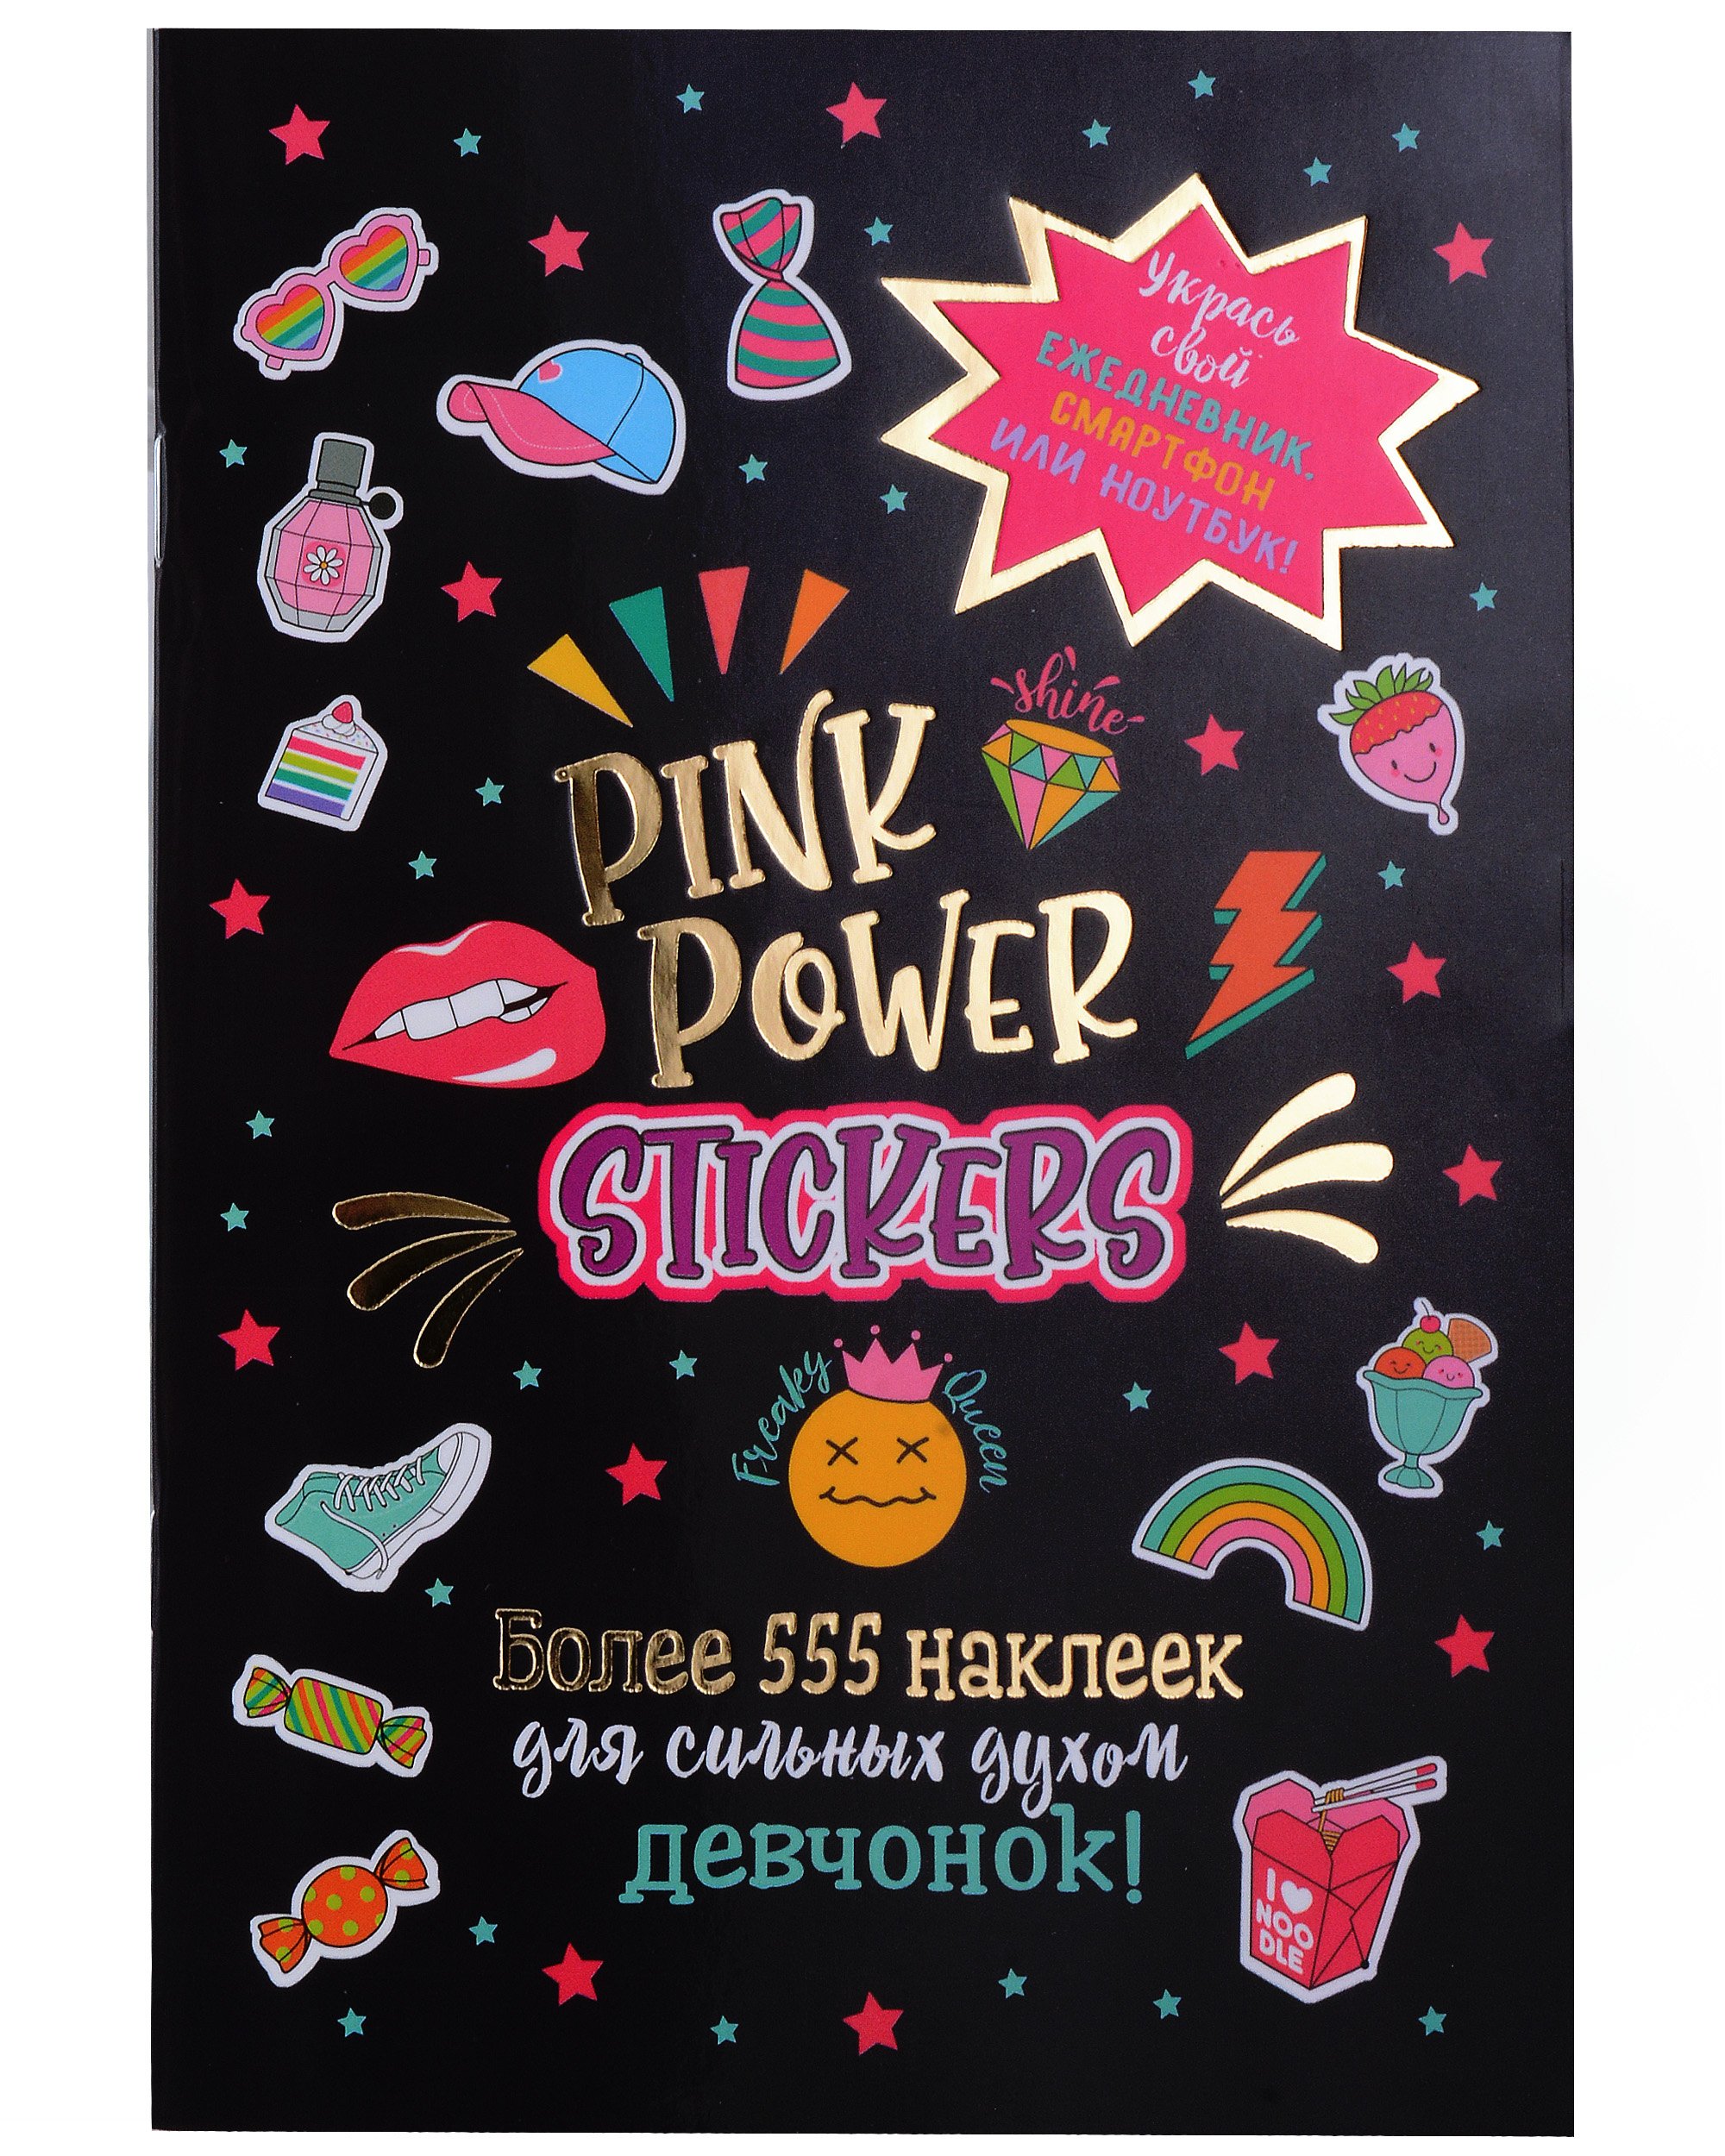 Pink Power Stickers.  555     !